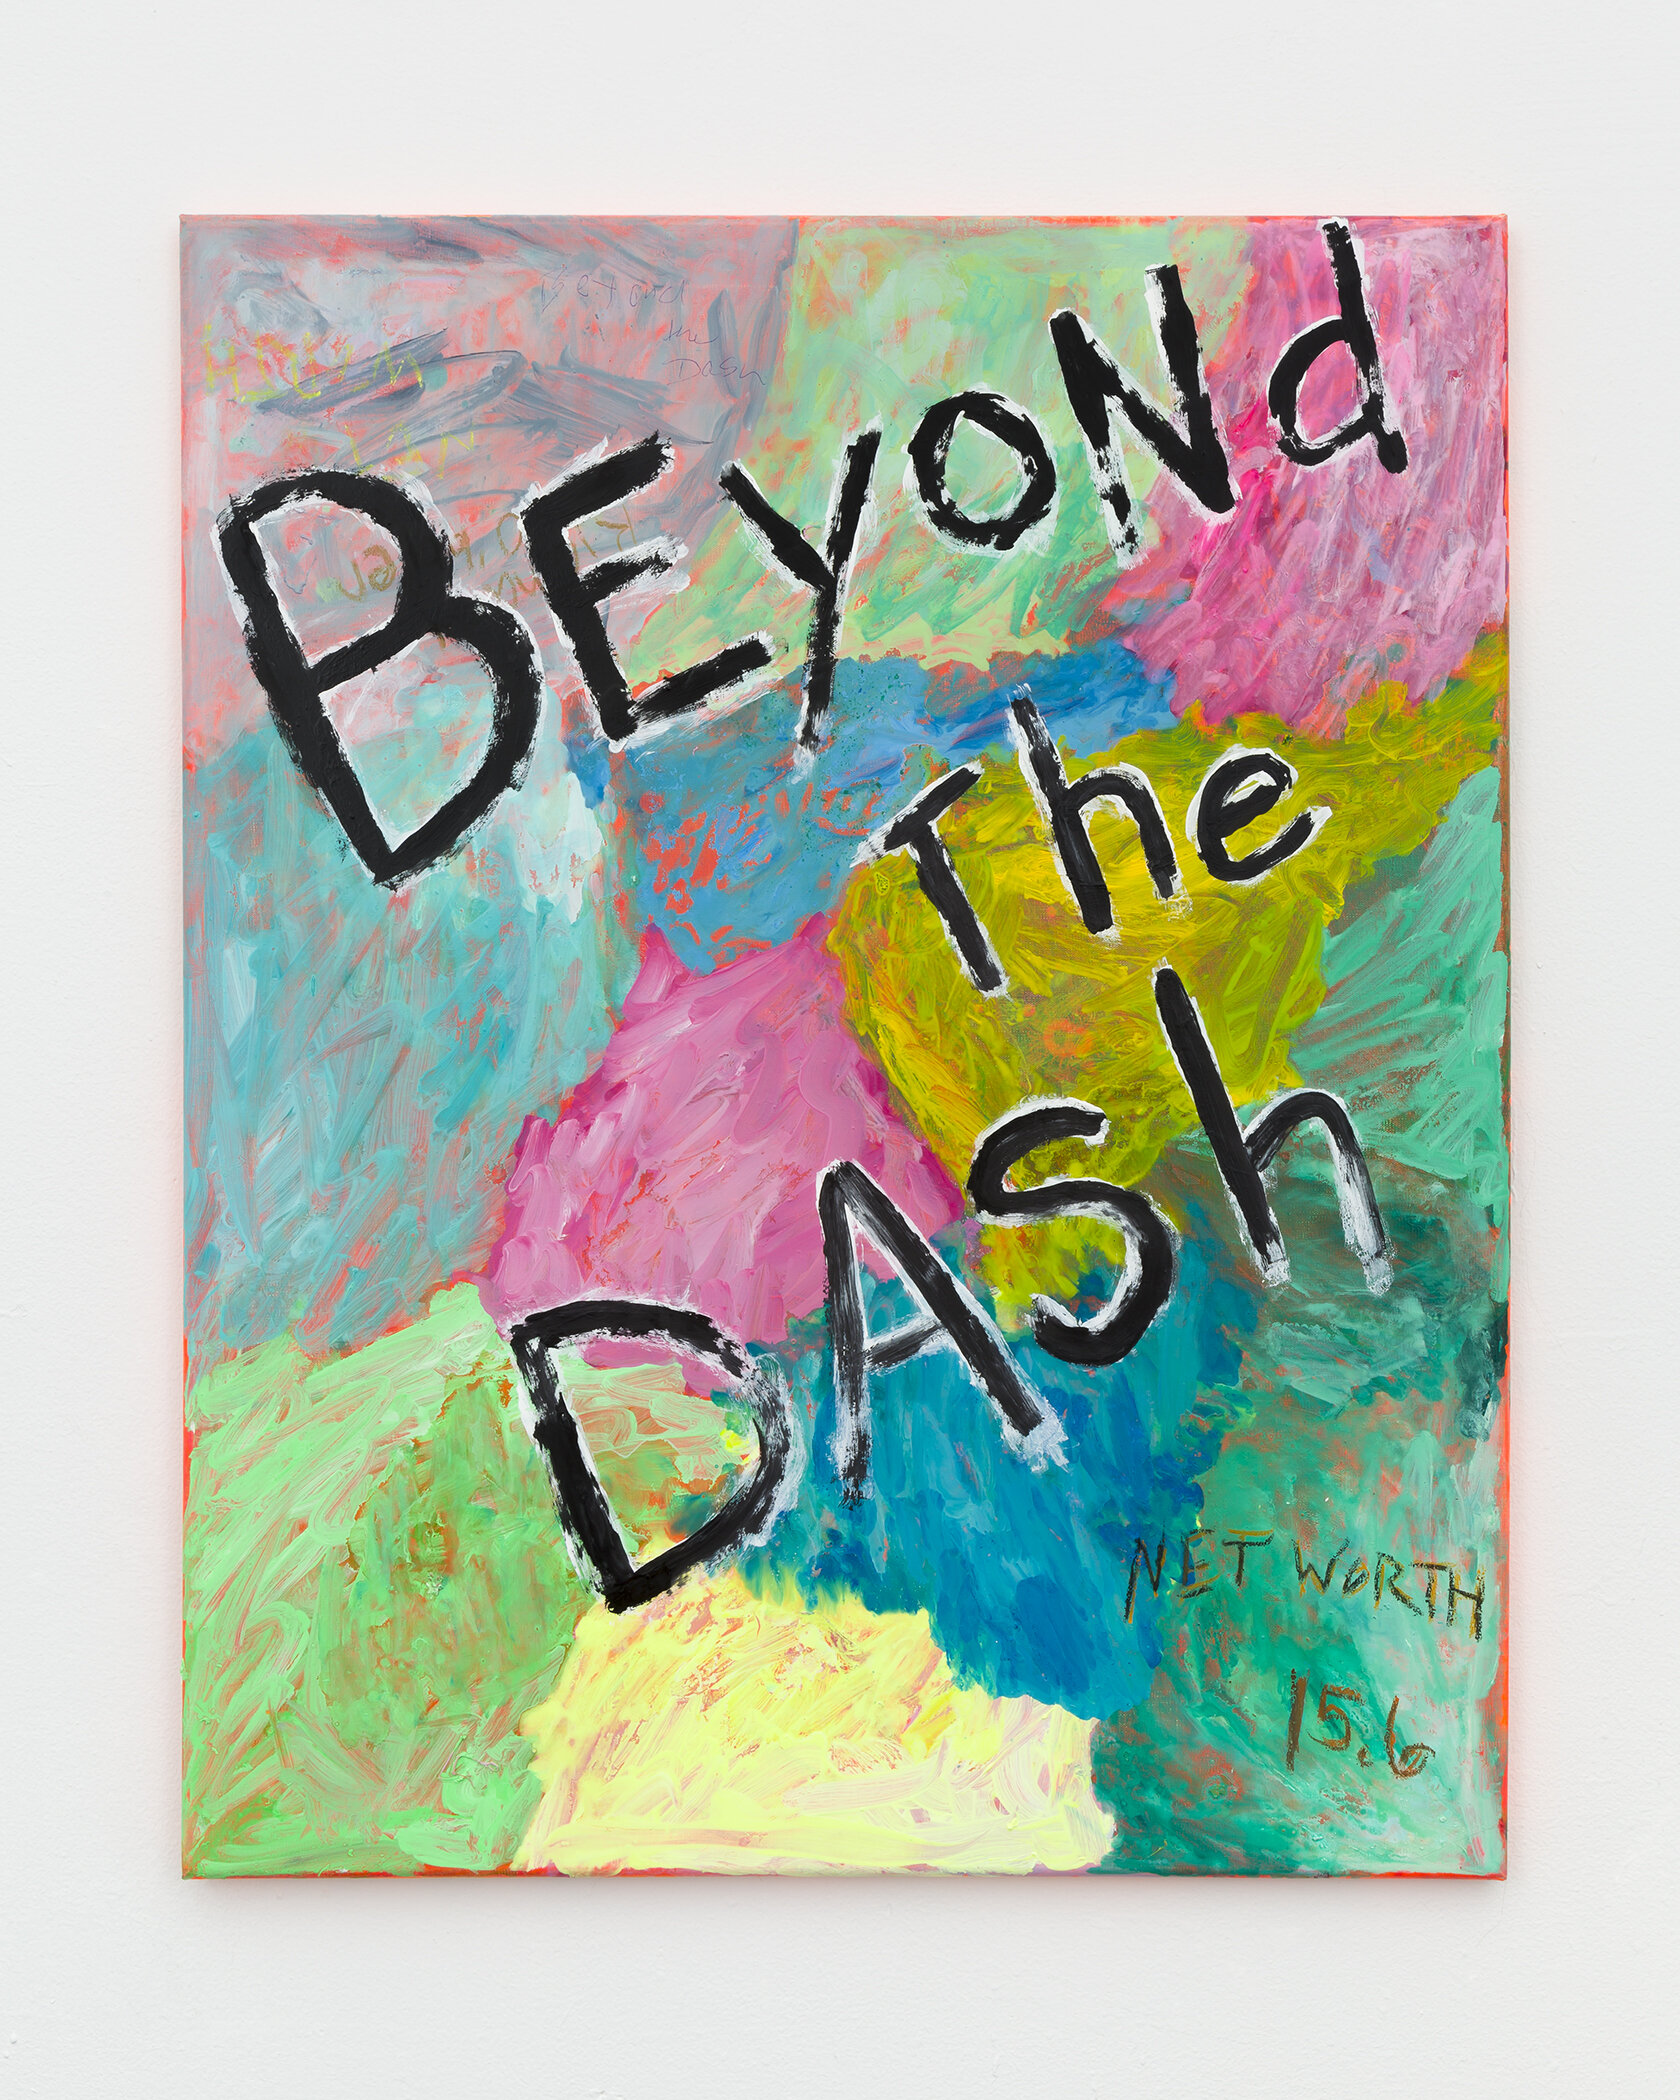  Alicia Gibson,  Beyond the Dash,  2019, Oil and various on canvas,  30 × 24 inches  